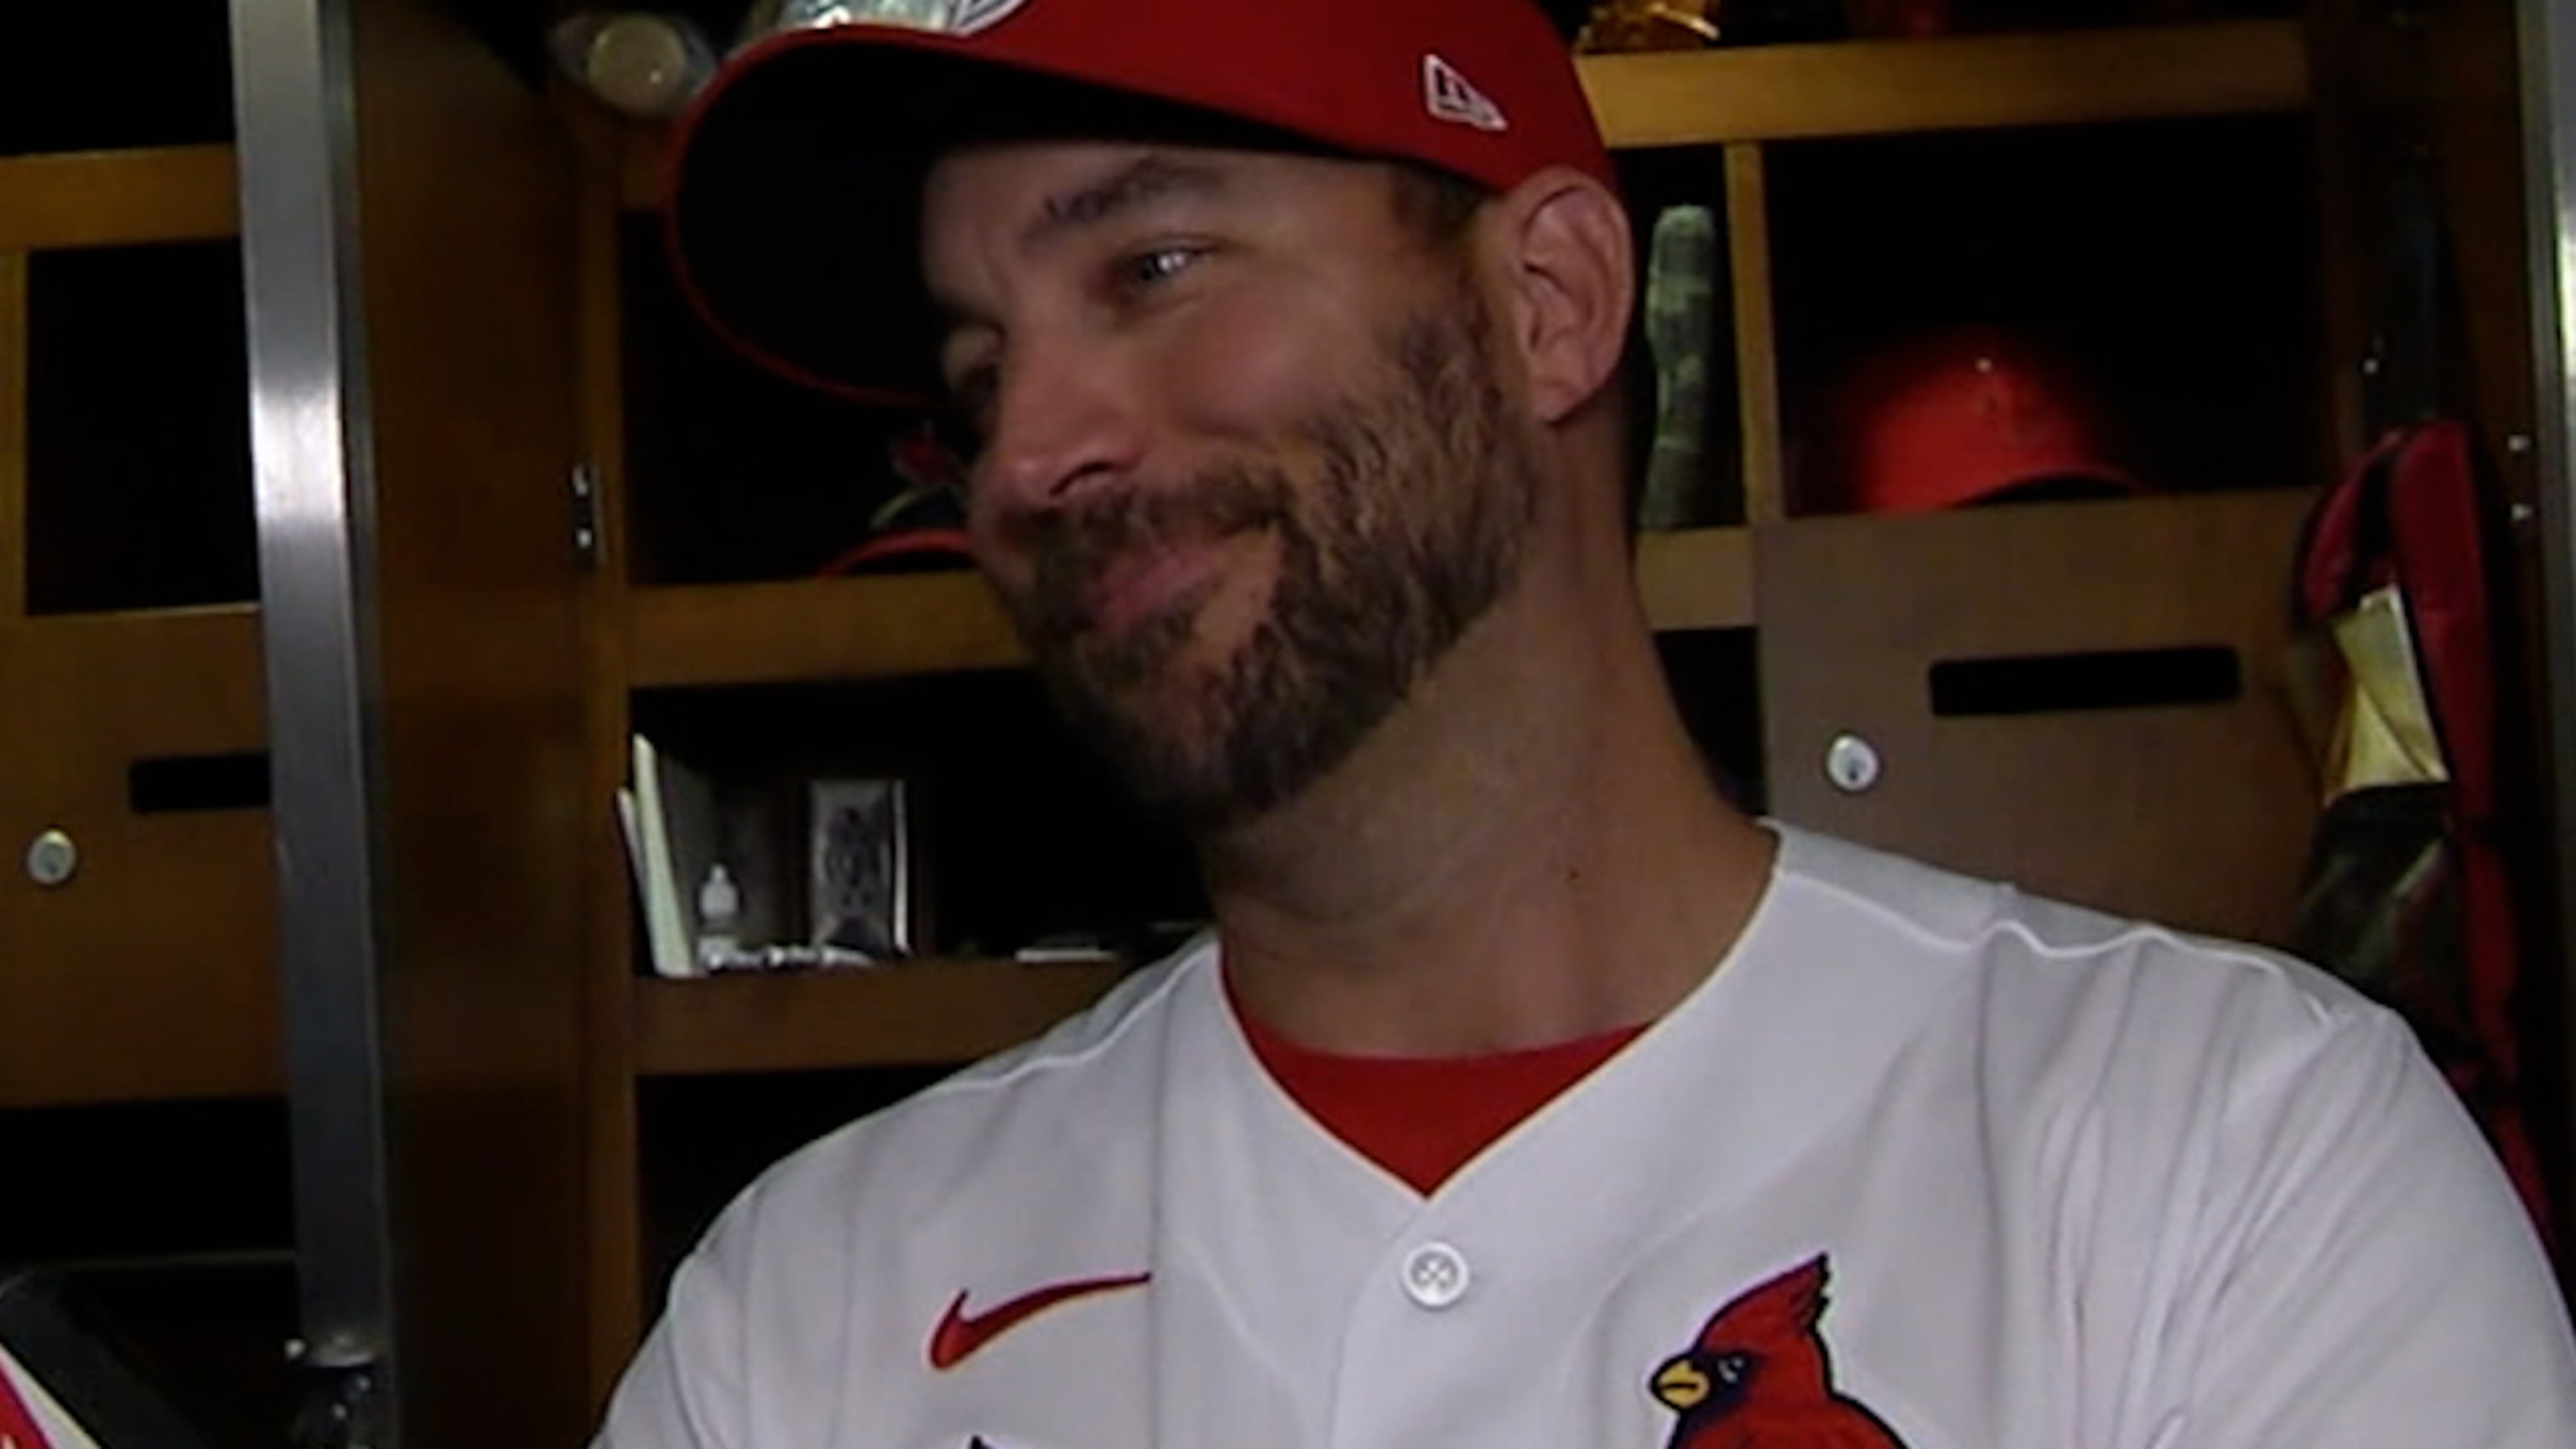 Wainwright re-signs with Blues?' Cards pitcher has fun with fans